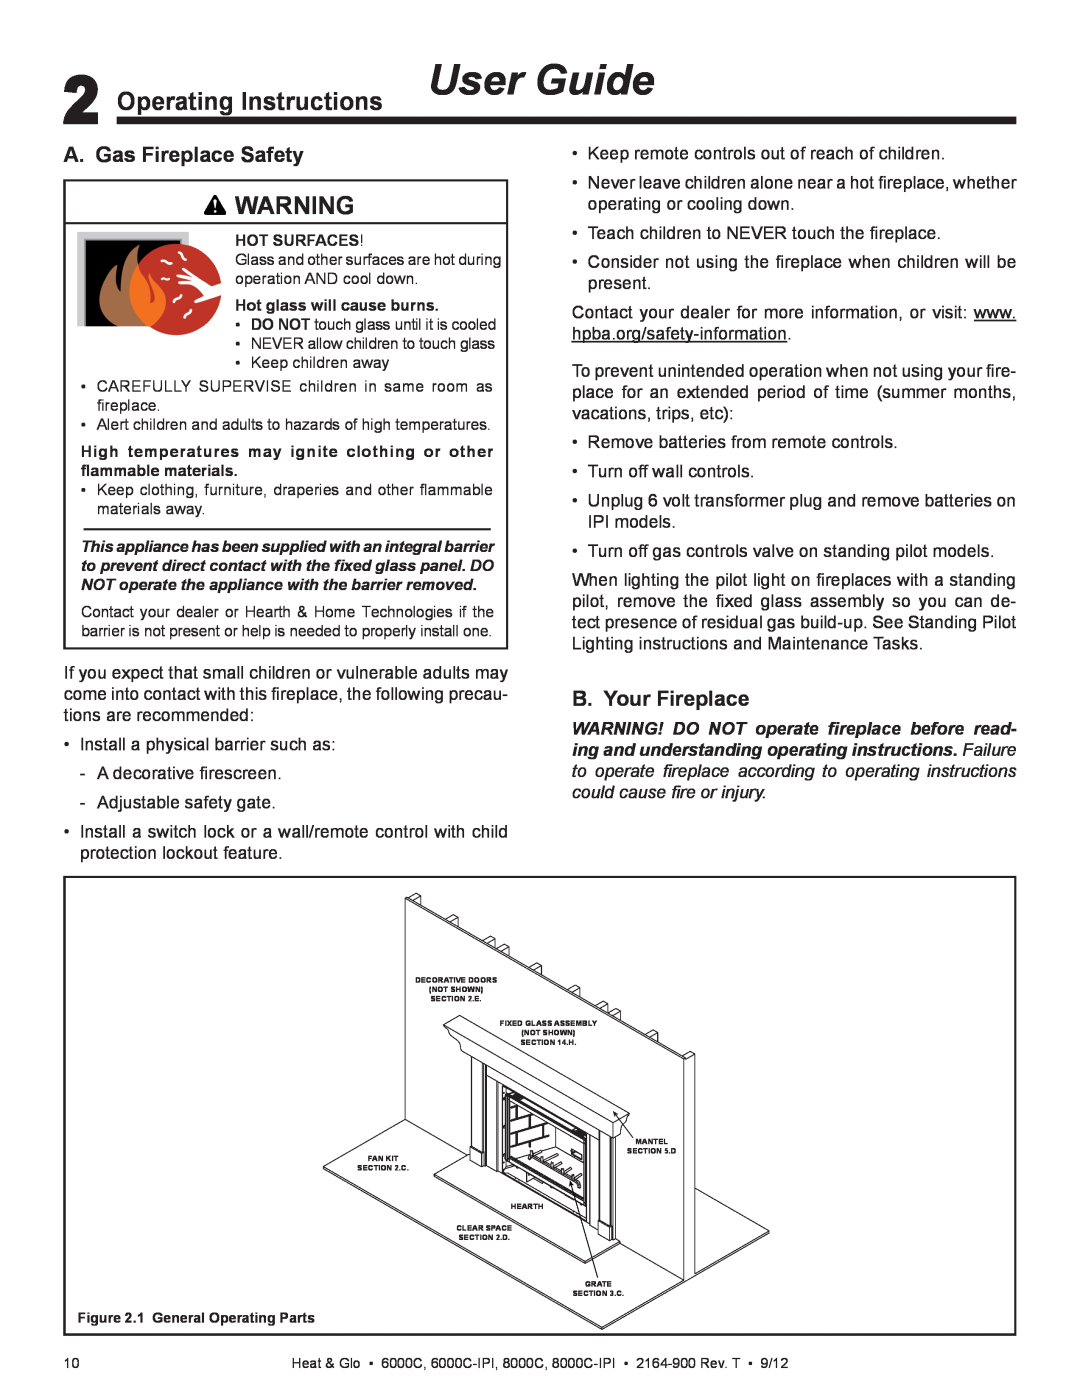 Heat & Glo LifeStyle 6000C manual Operating Instructions User Guide, A. Gas Fireplace Safety, B. Your Fireplace 